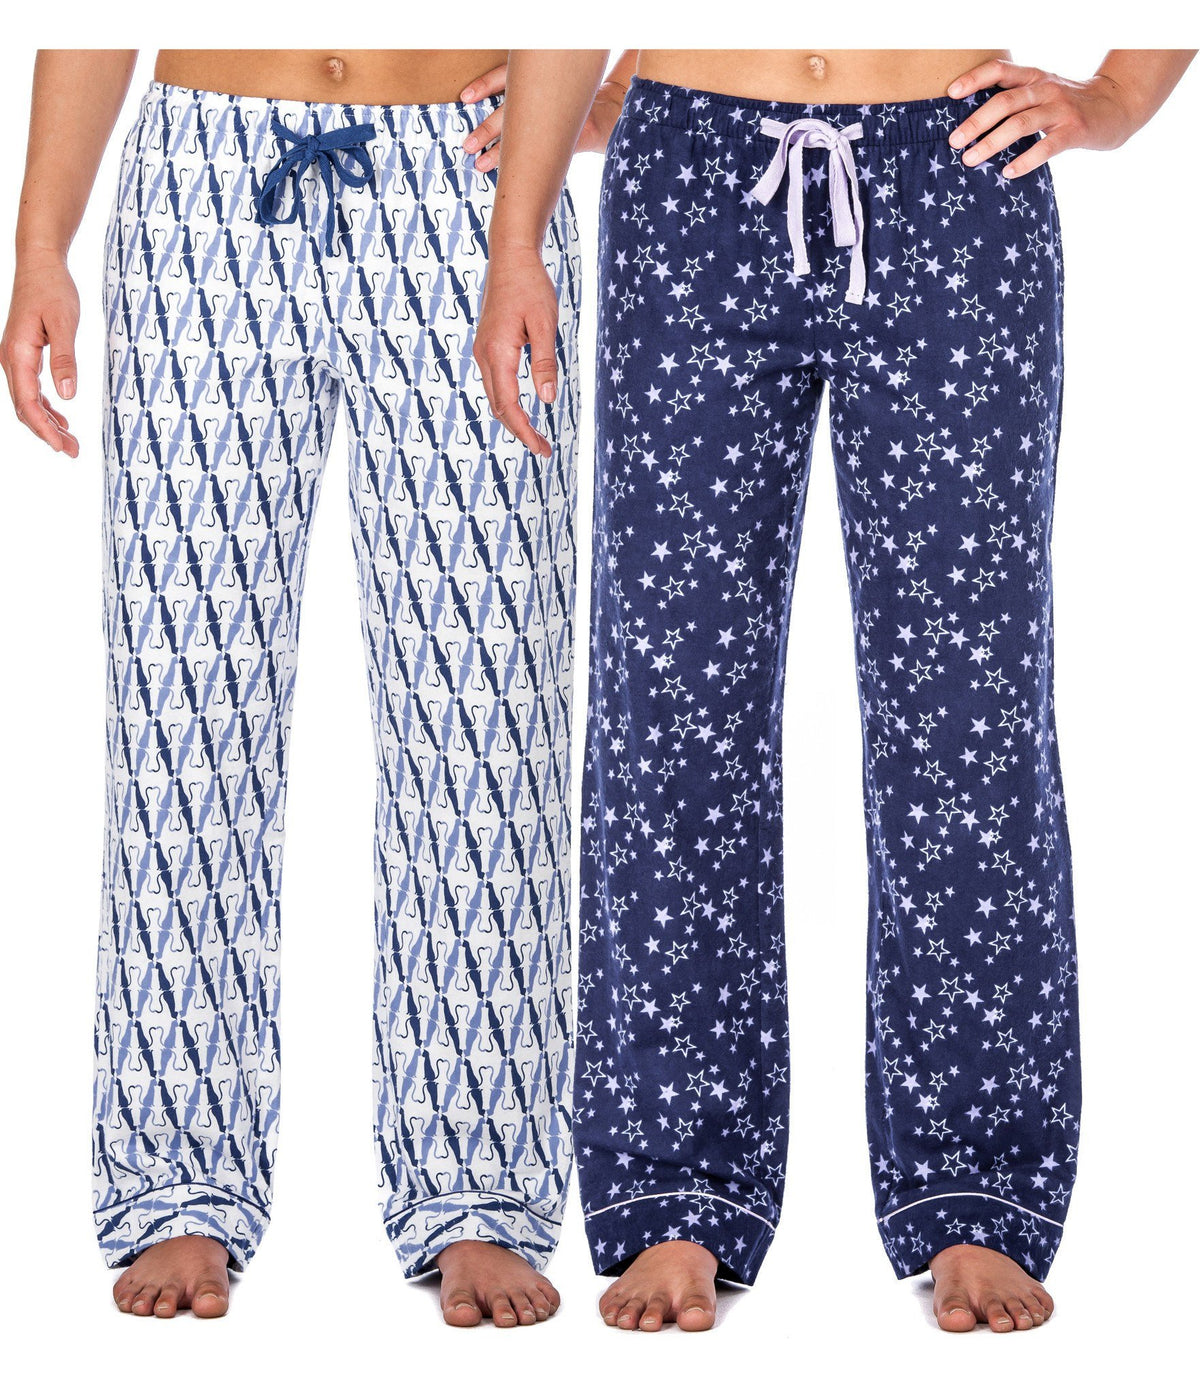 Women's Cotton Flannel Lounge Pants (2 Pack) - Relaxed Fit - Its a Cats World Blue/Starry Nights Blue